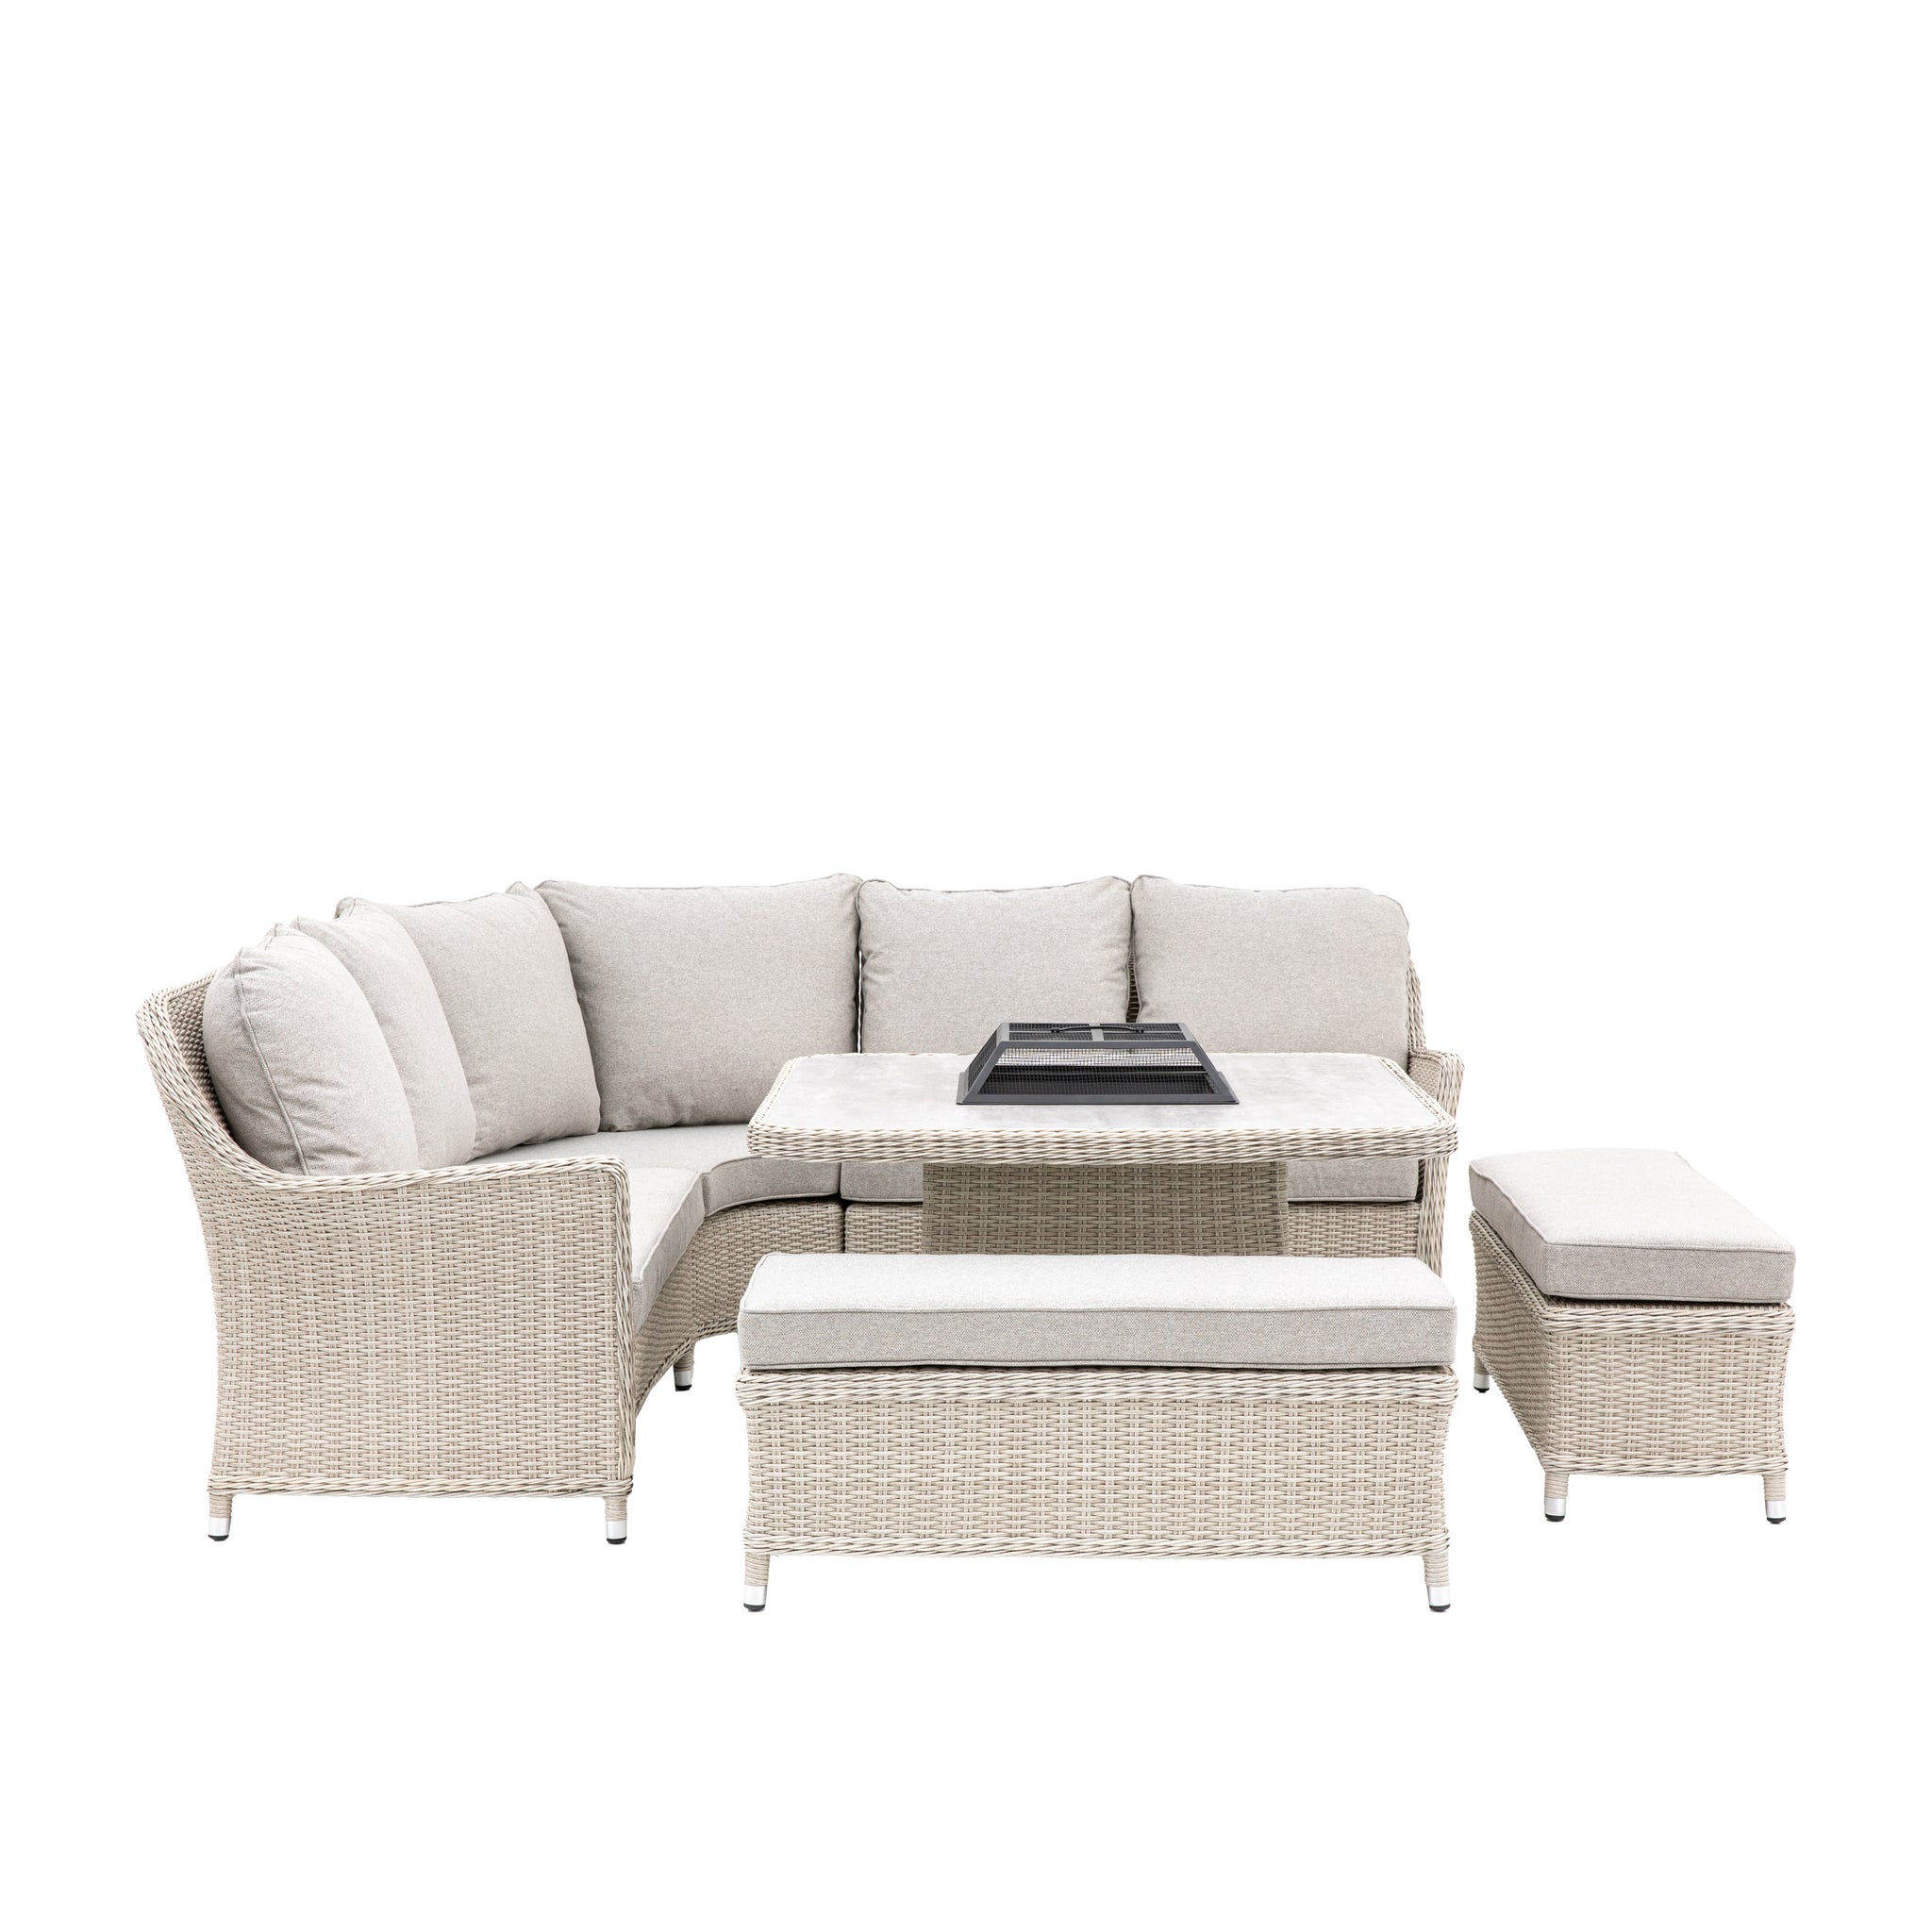 Colton Corner Square Dining Set With Fire Pit